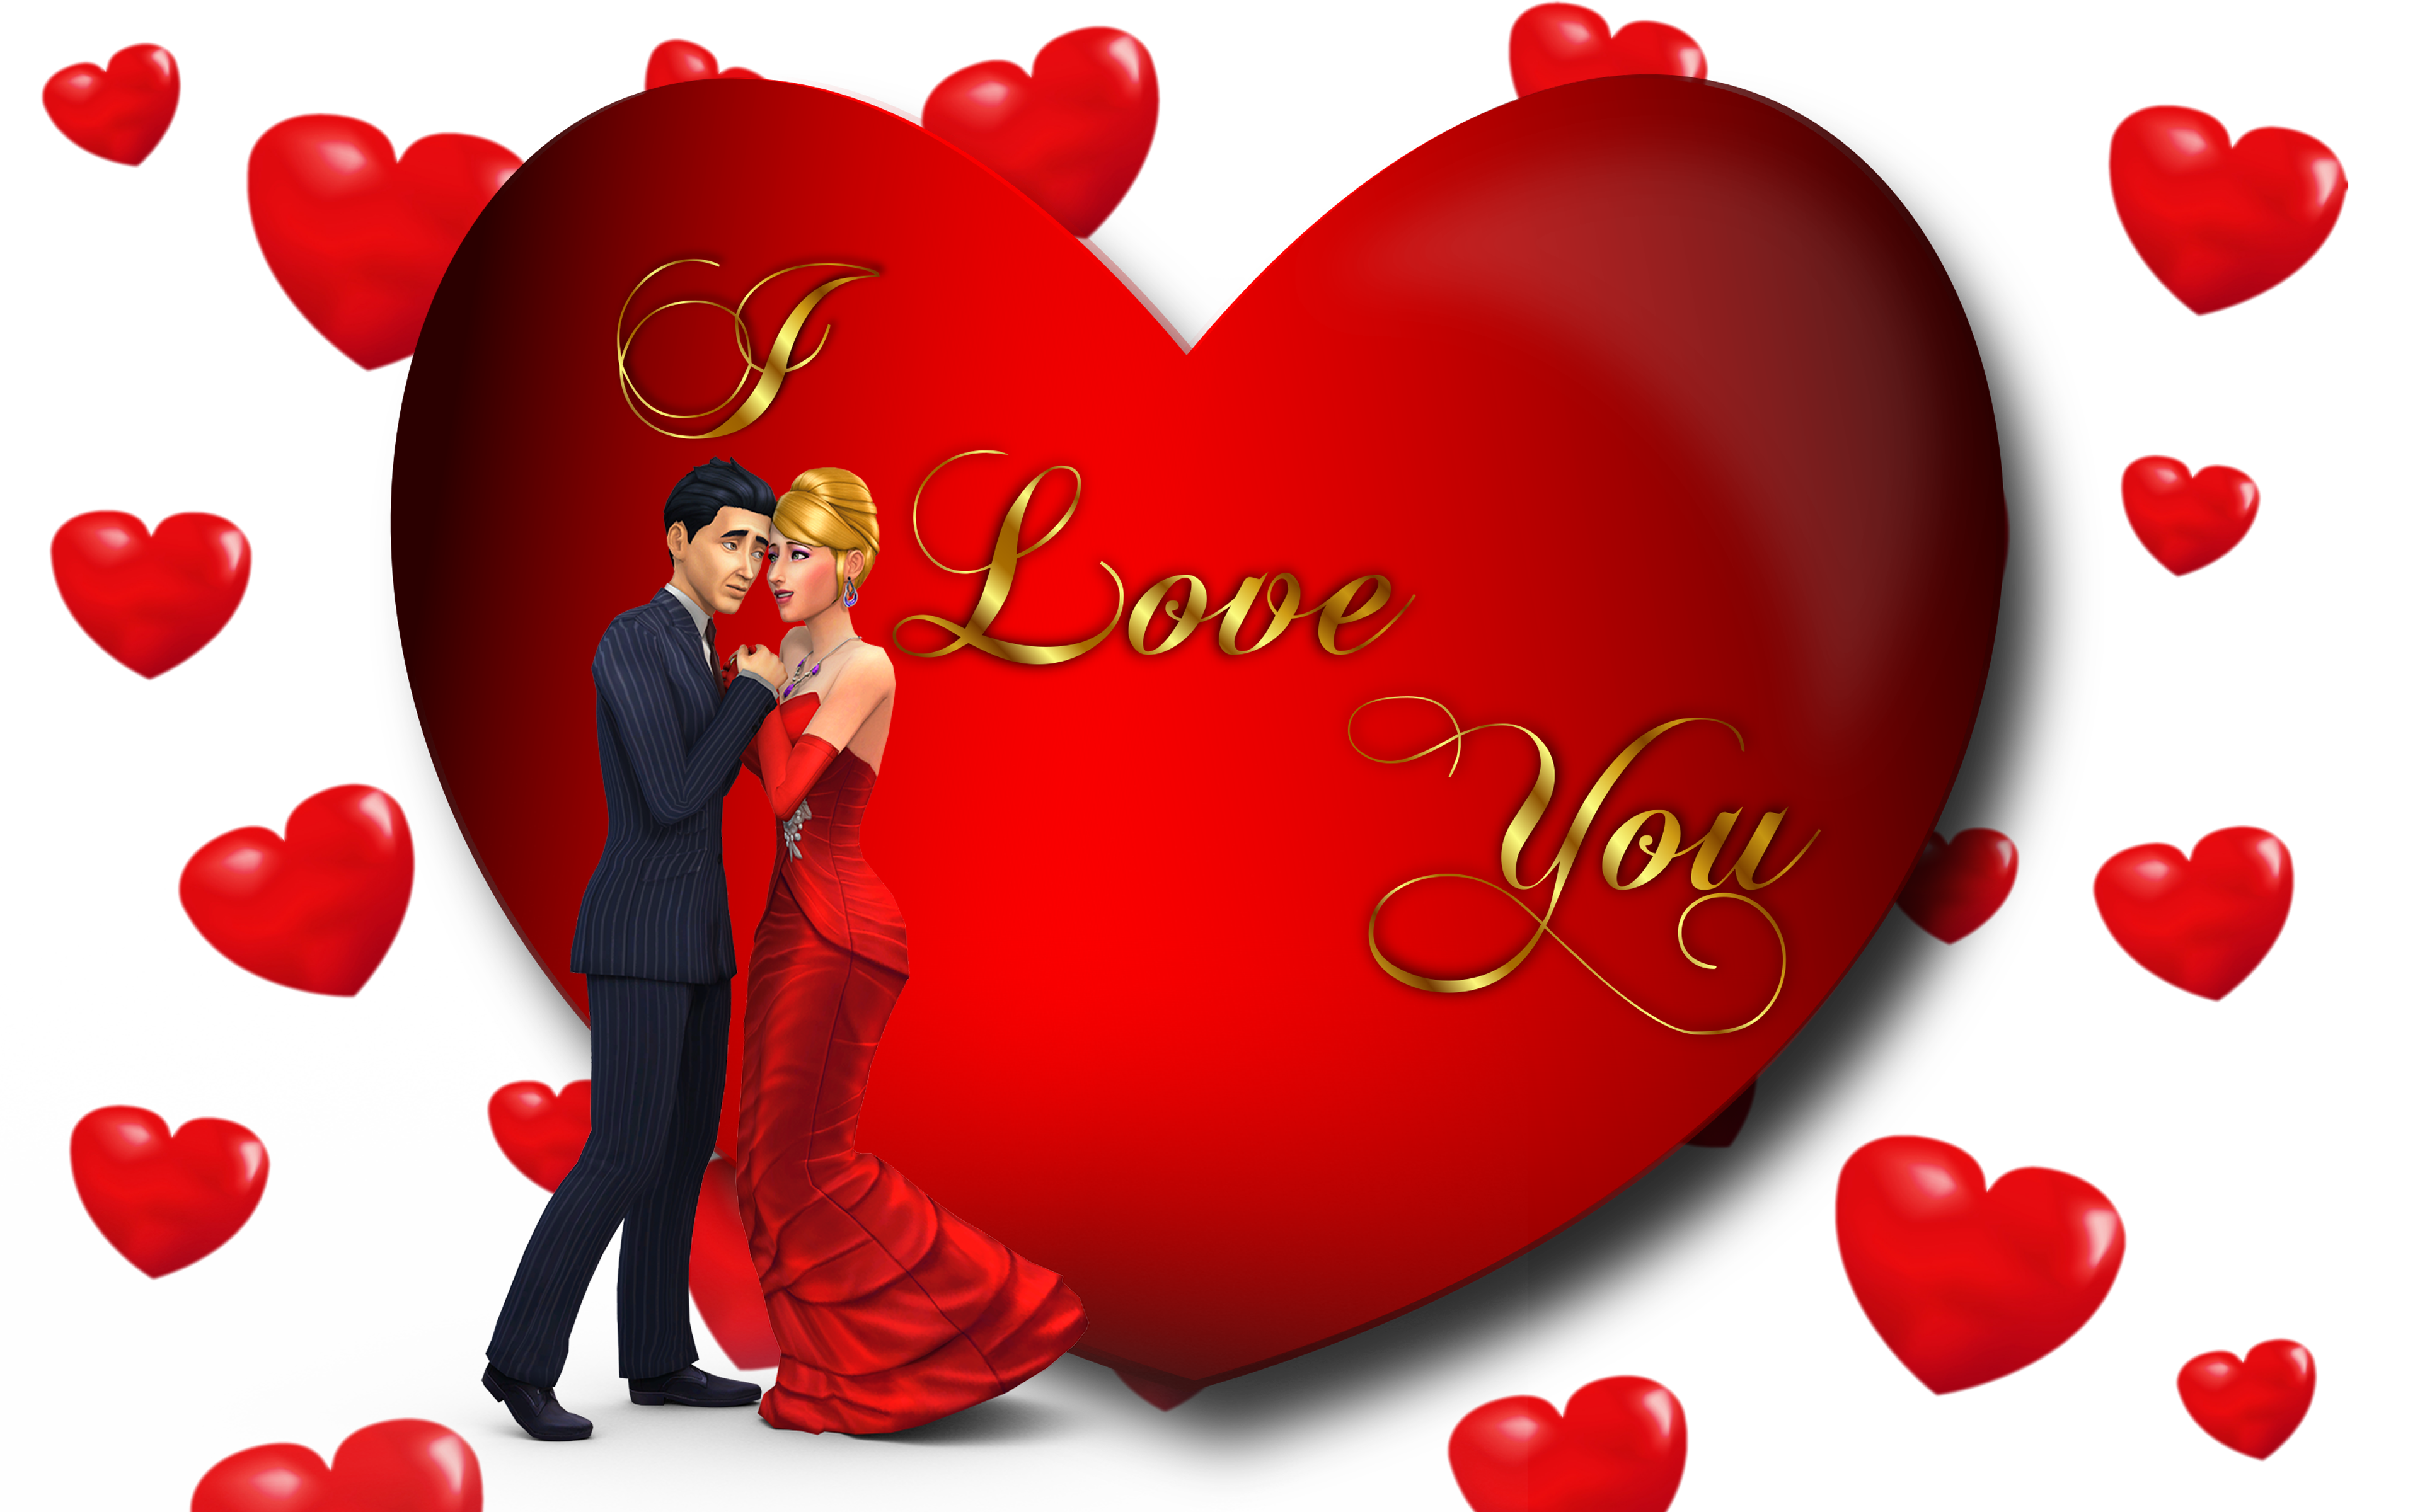 I Love You Loving Couple Red Heart Desktop Hd Wallpaper For Mobile Phones  Tablet And Pc 3840x2400 : 